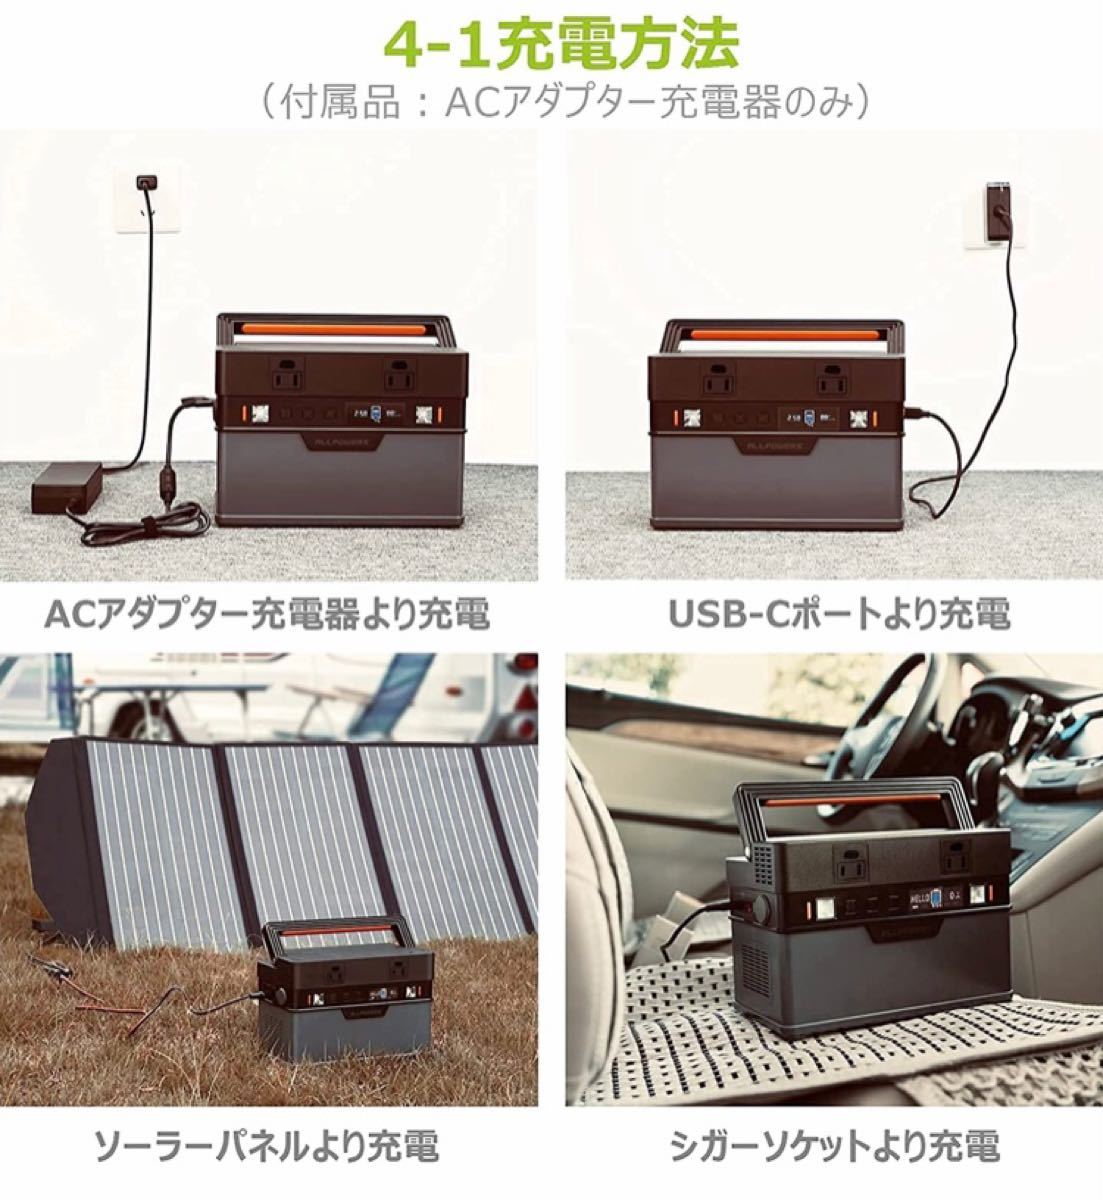 ☆ ALLPOWERS S300 ポータブル電源 300W 小型軽量 ワイヤレス充電